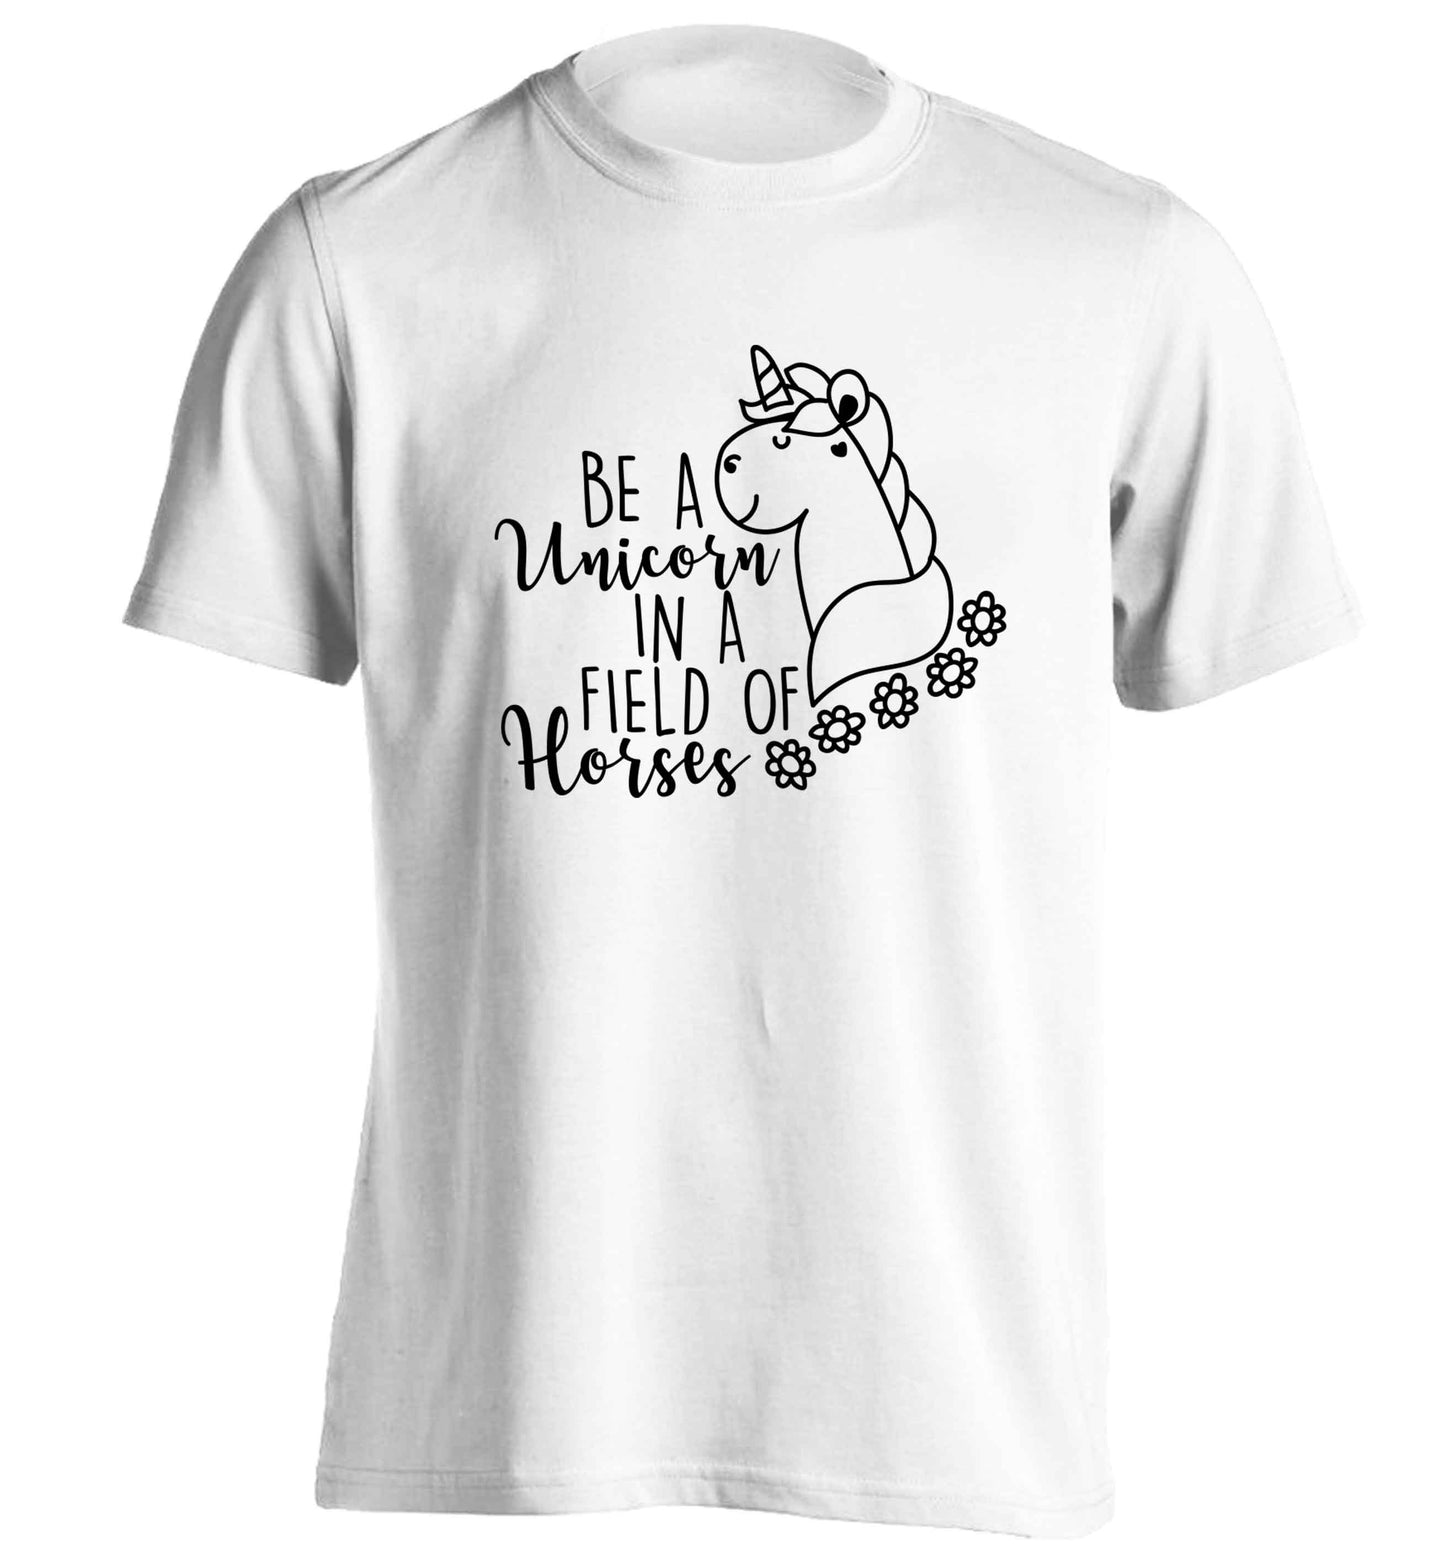 Be a unicorn in a field of horses adults unisex white Tshirt 2XL